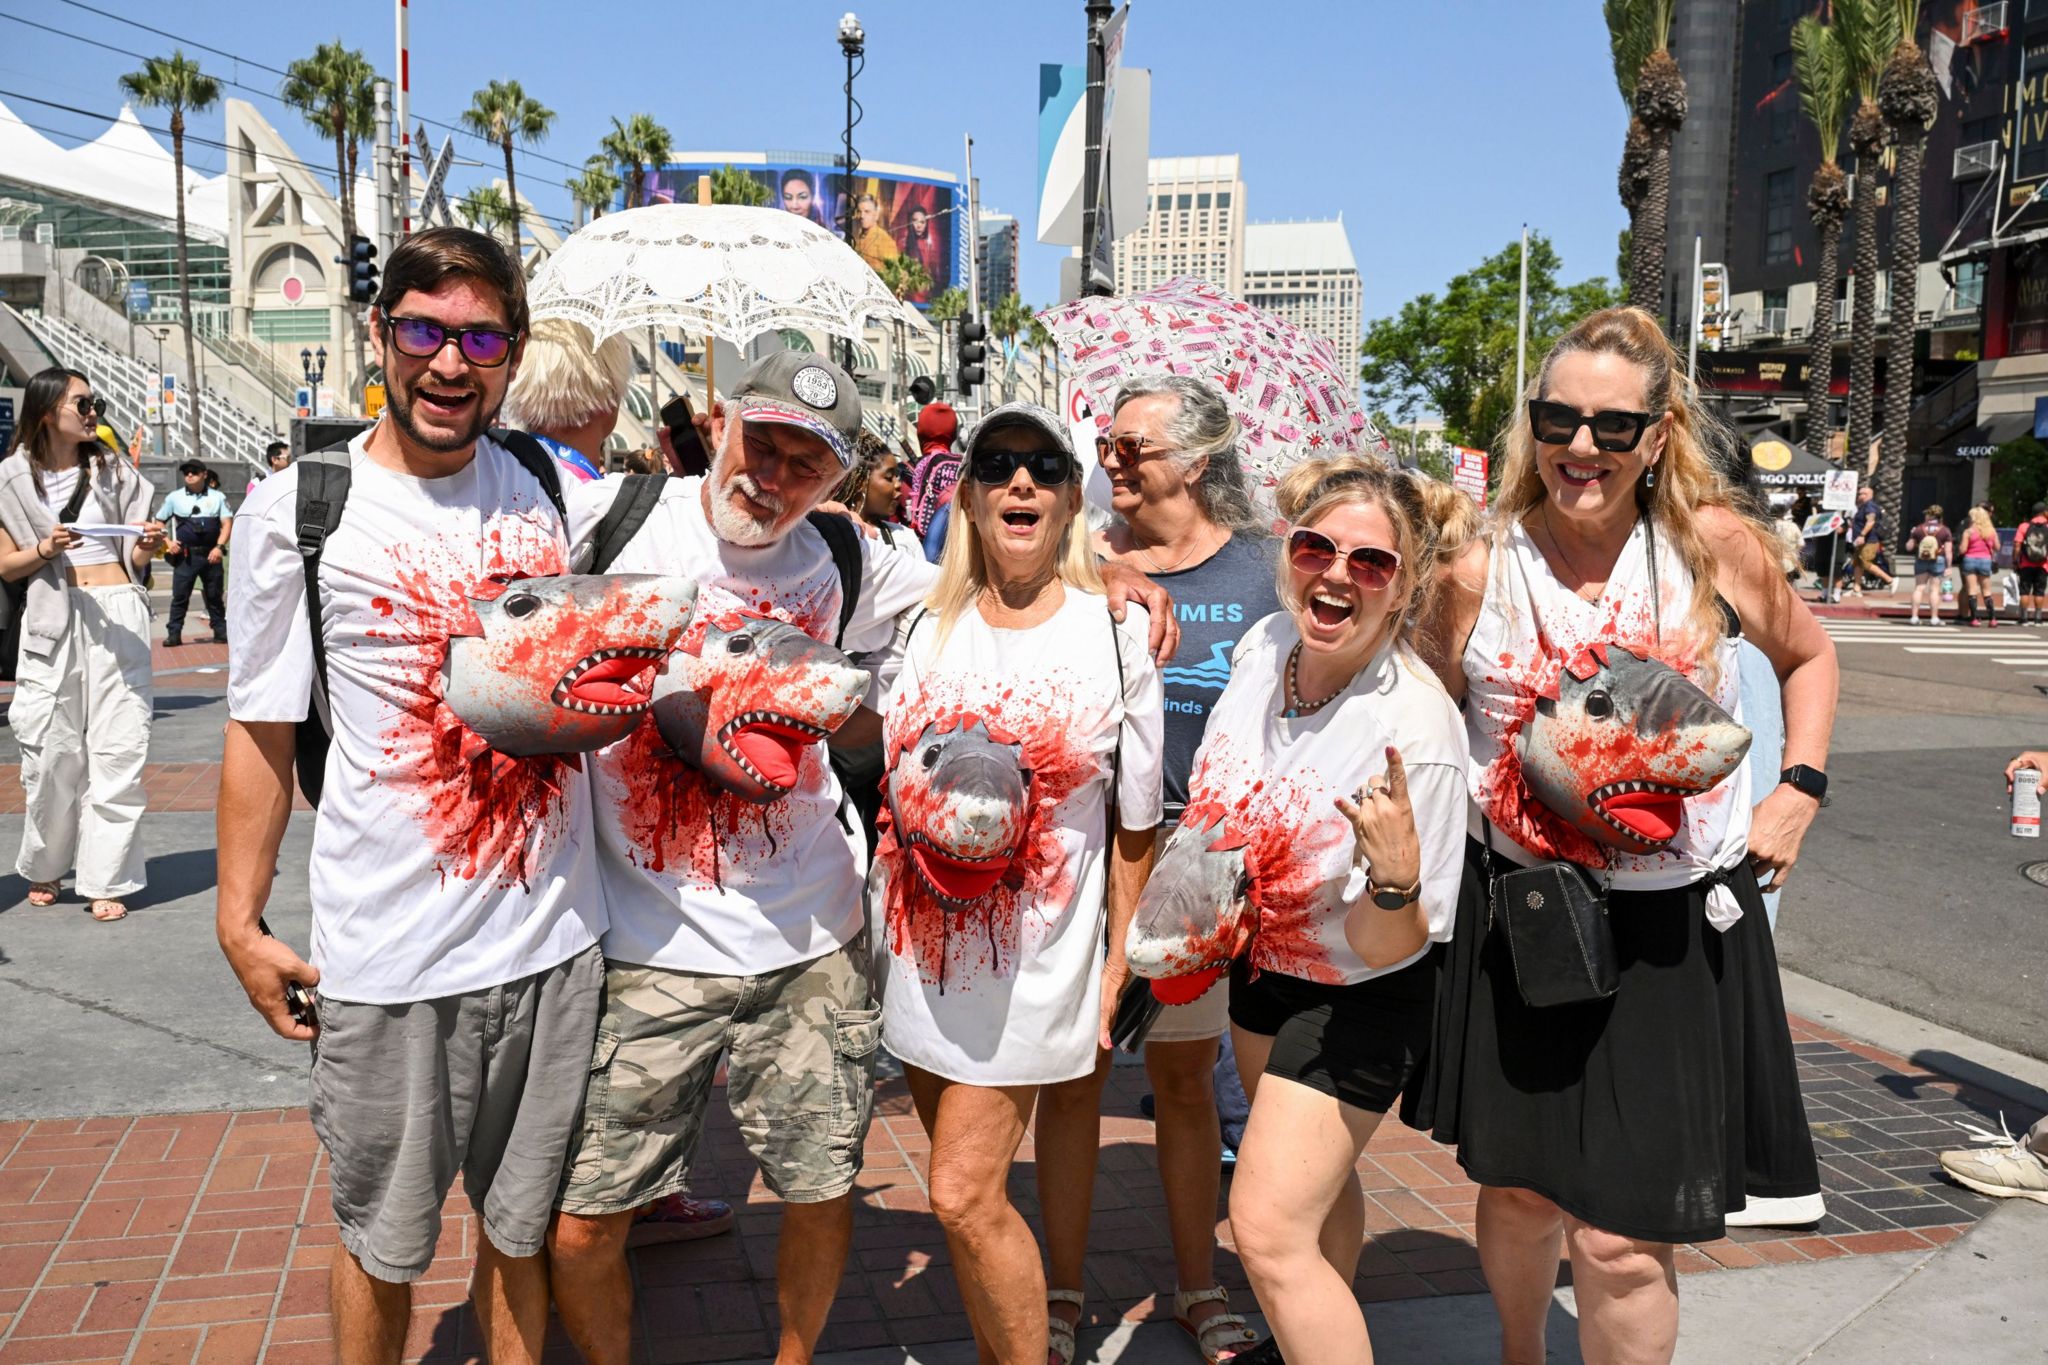 Fans of the film series Sharknado pose in their costumes 